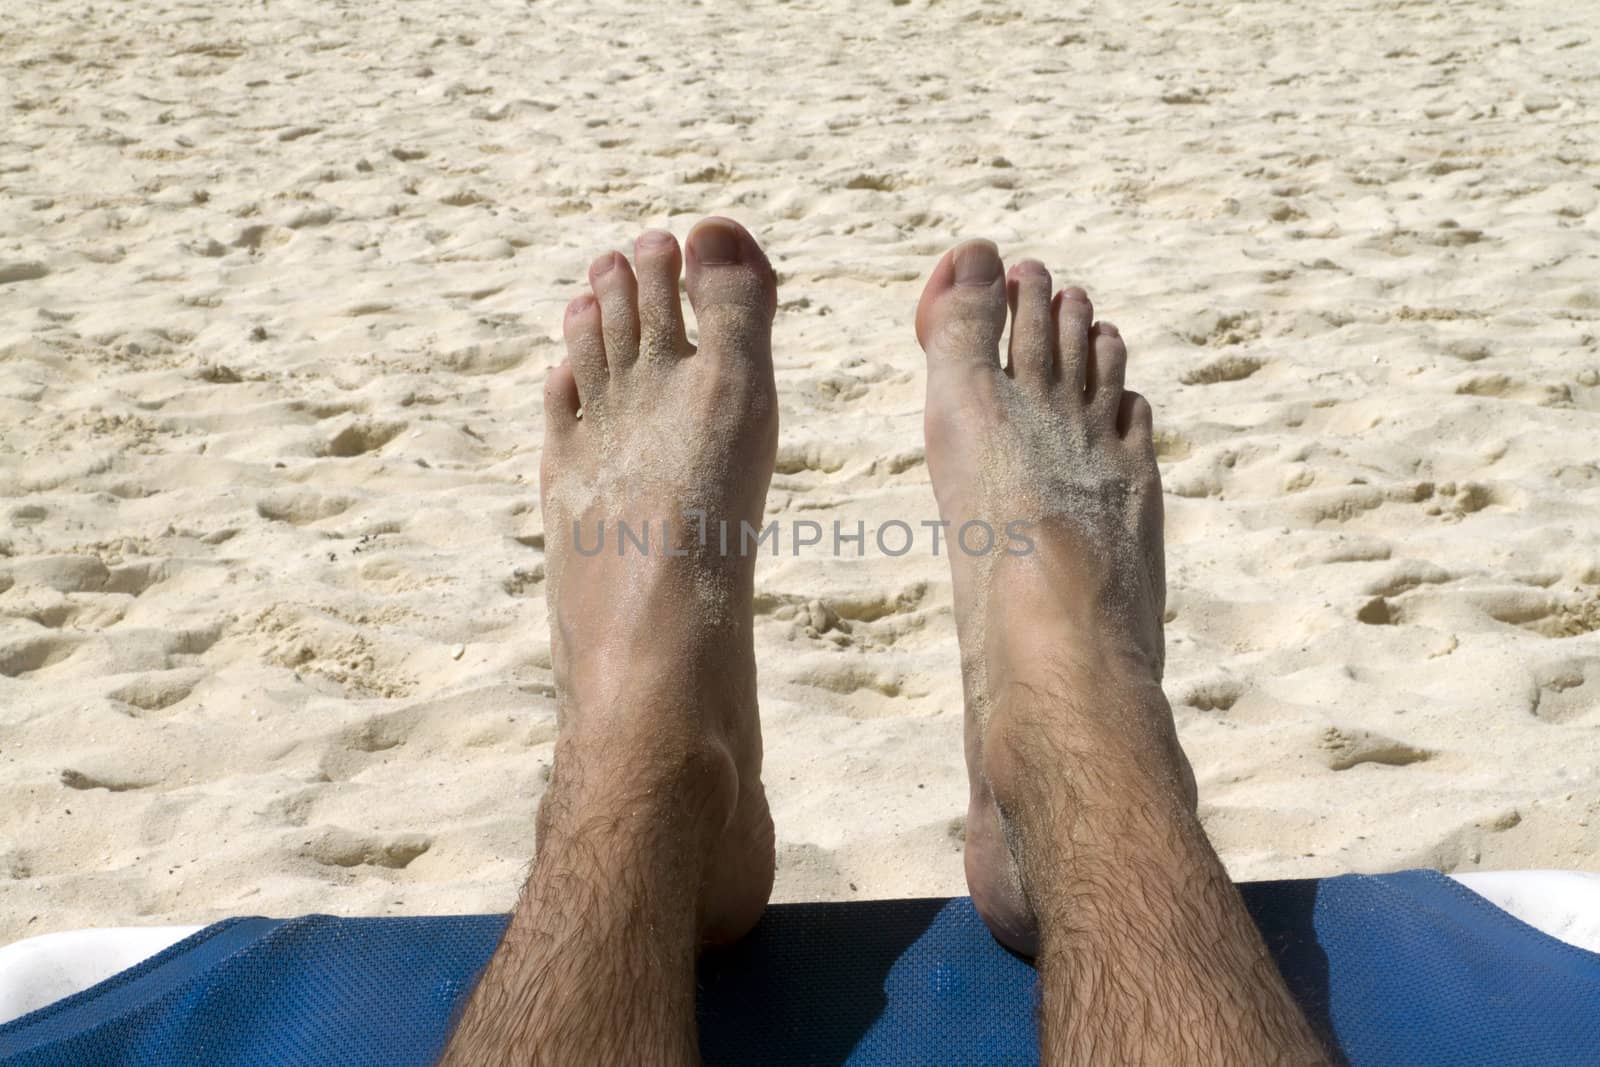 Two feet relaxing on a beach by the ocean